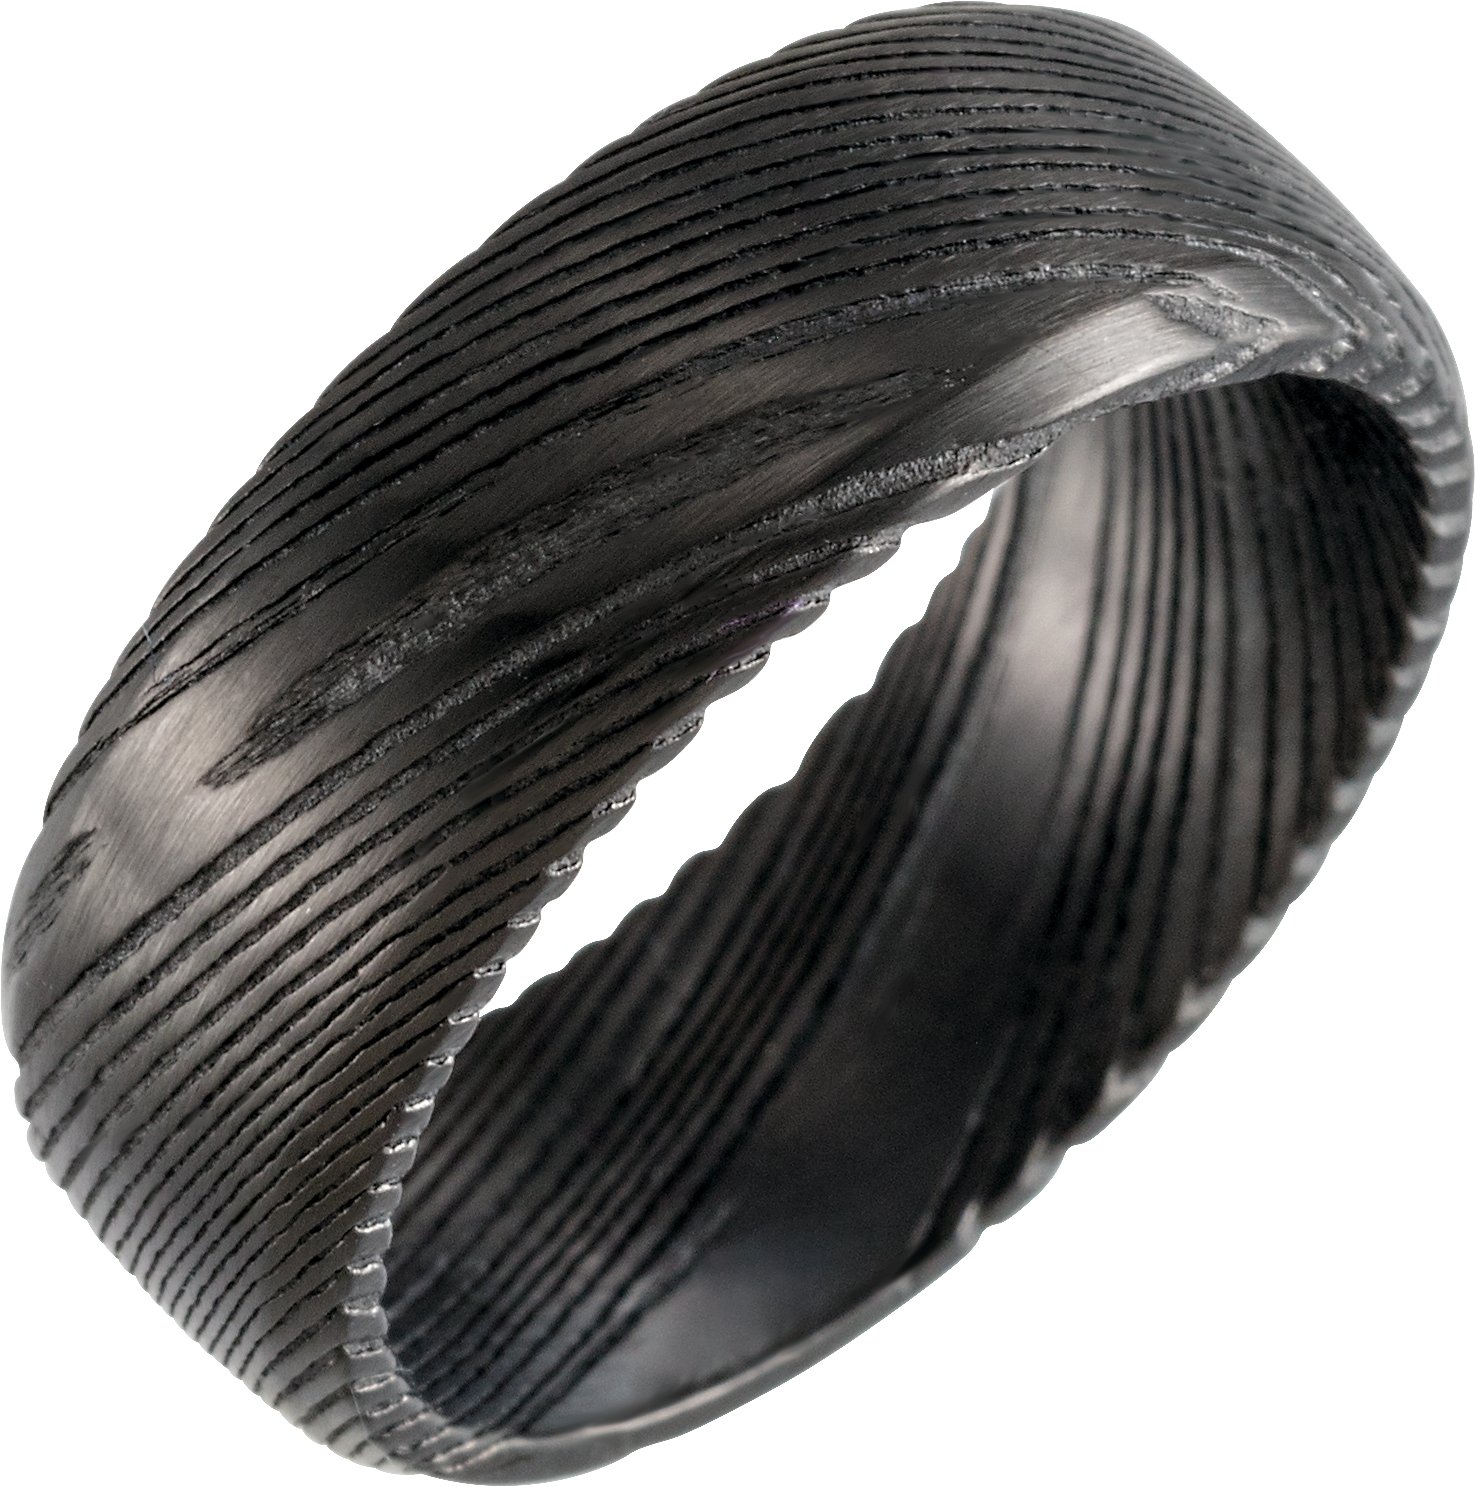 Black Damascus Steel 8 mm Patterned Band Size 7 Ref 16363465